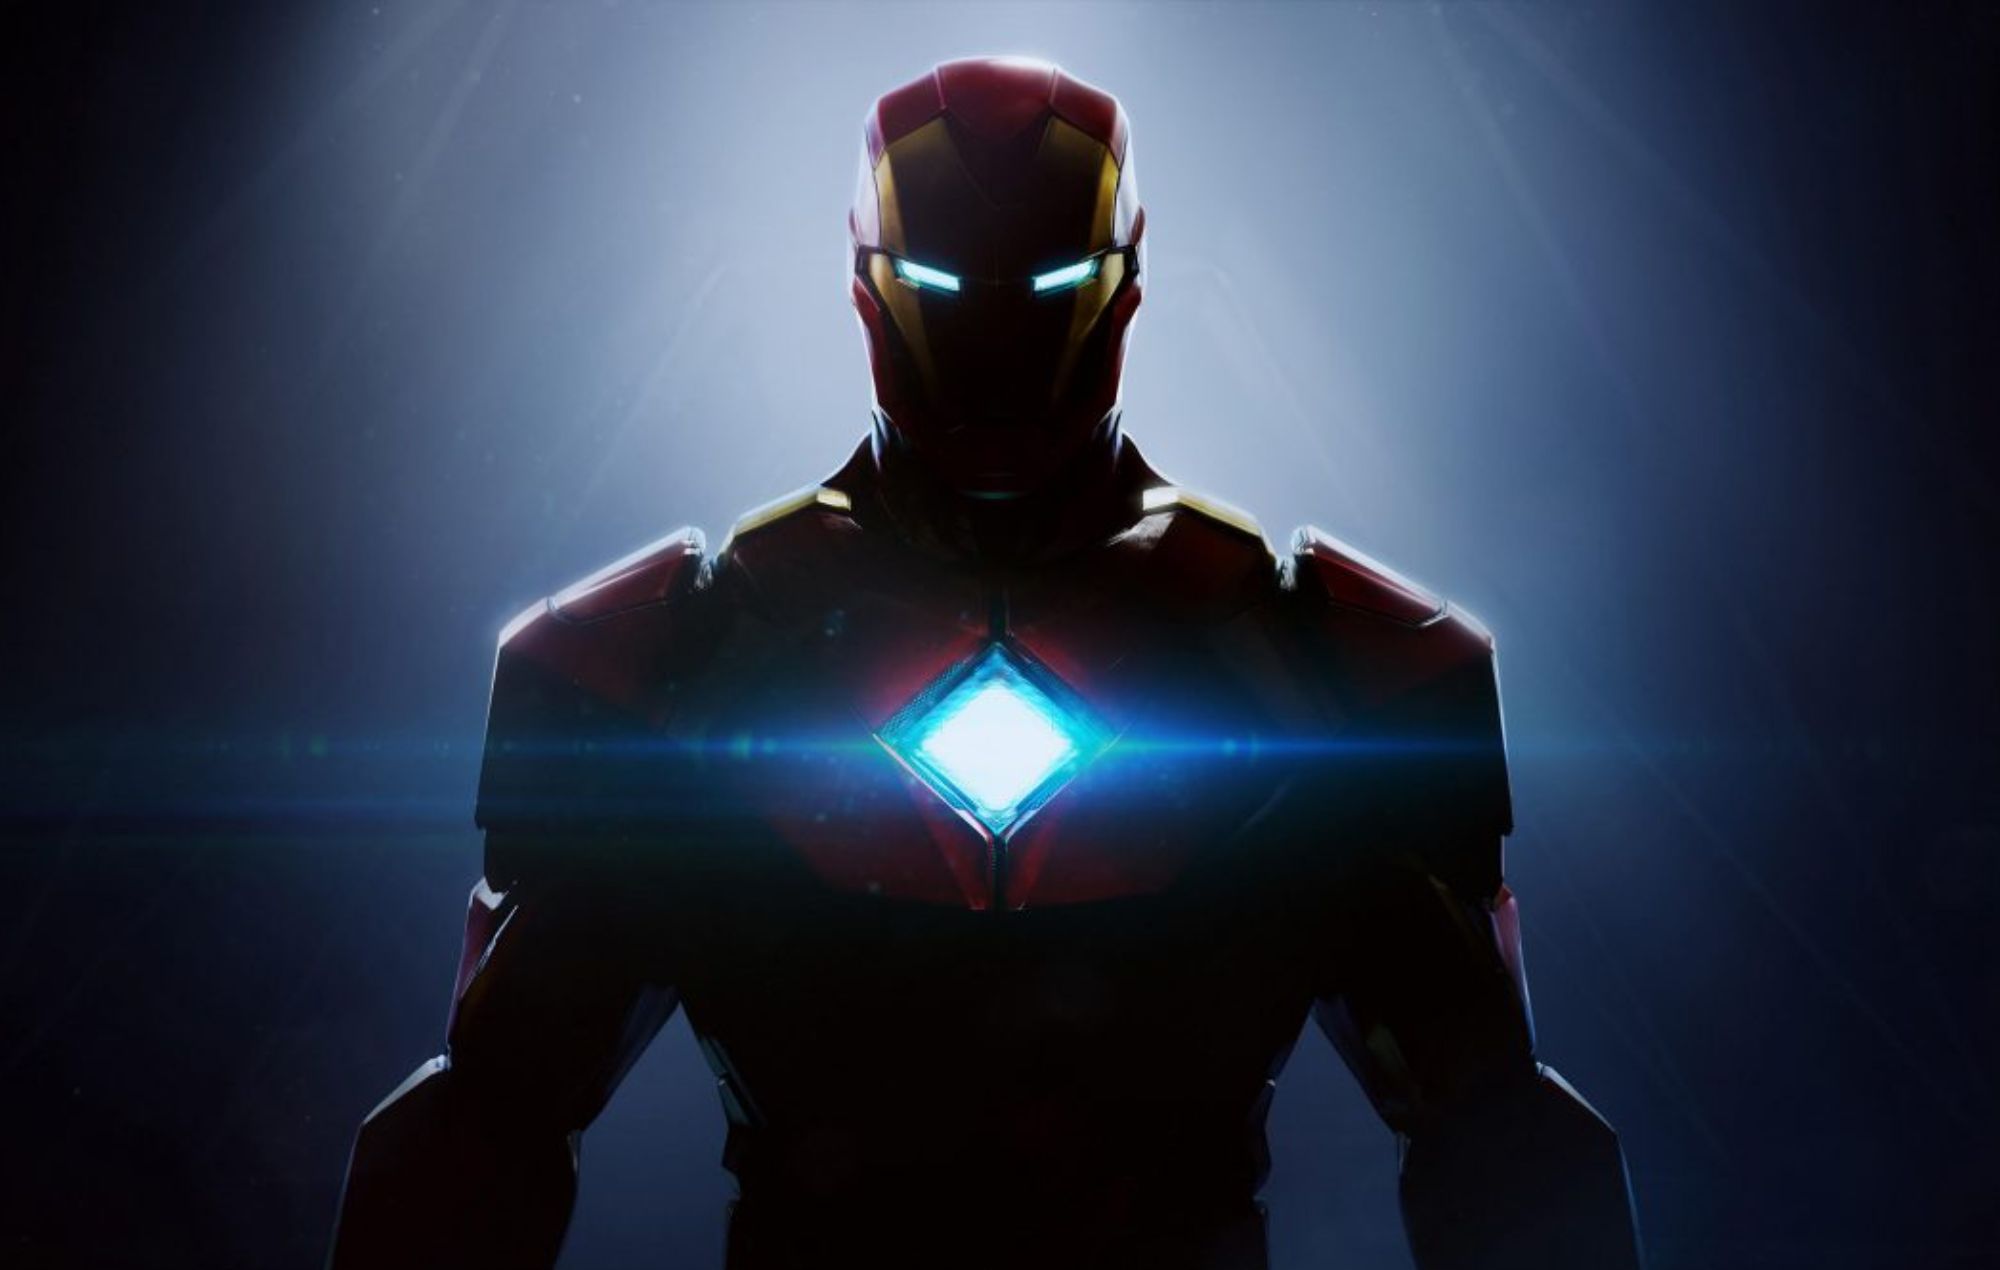 EA begins production of single-player Iron Man game